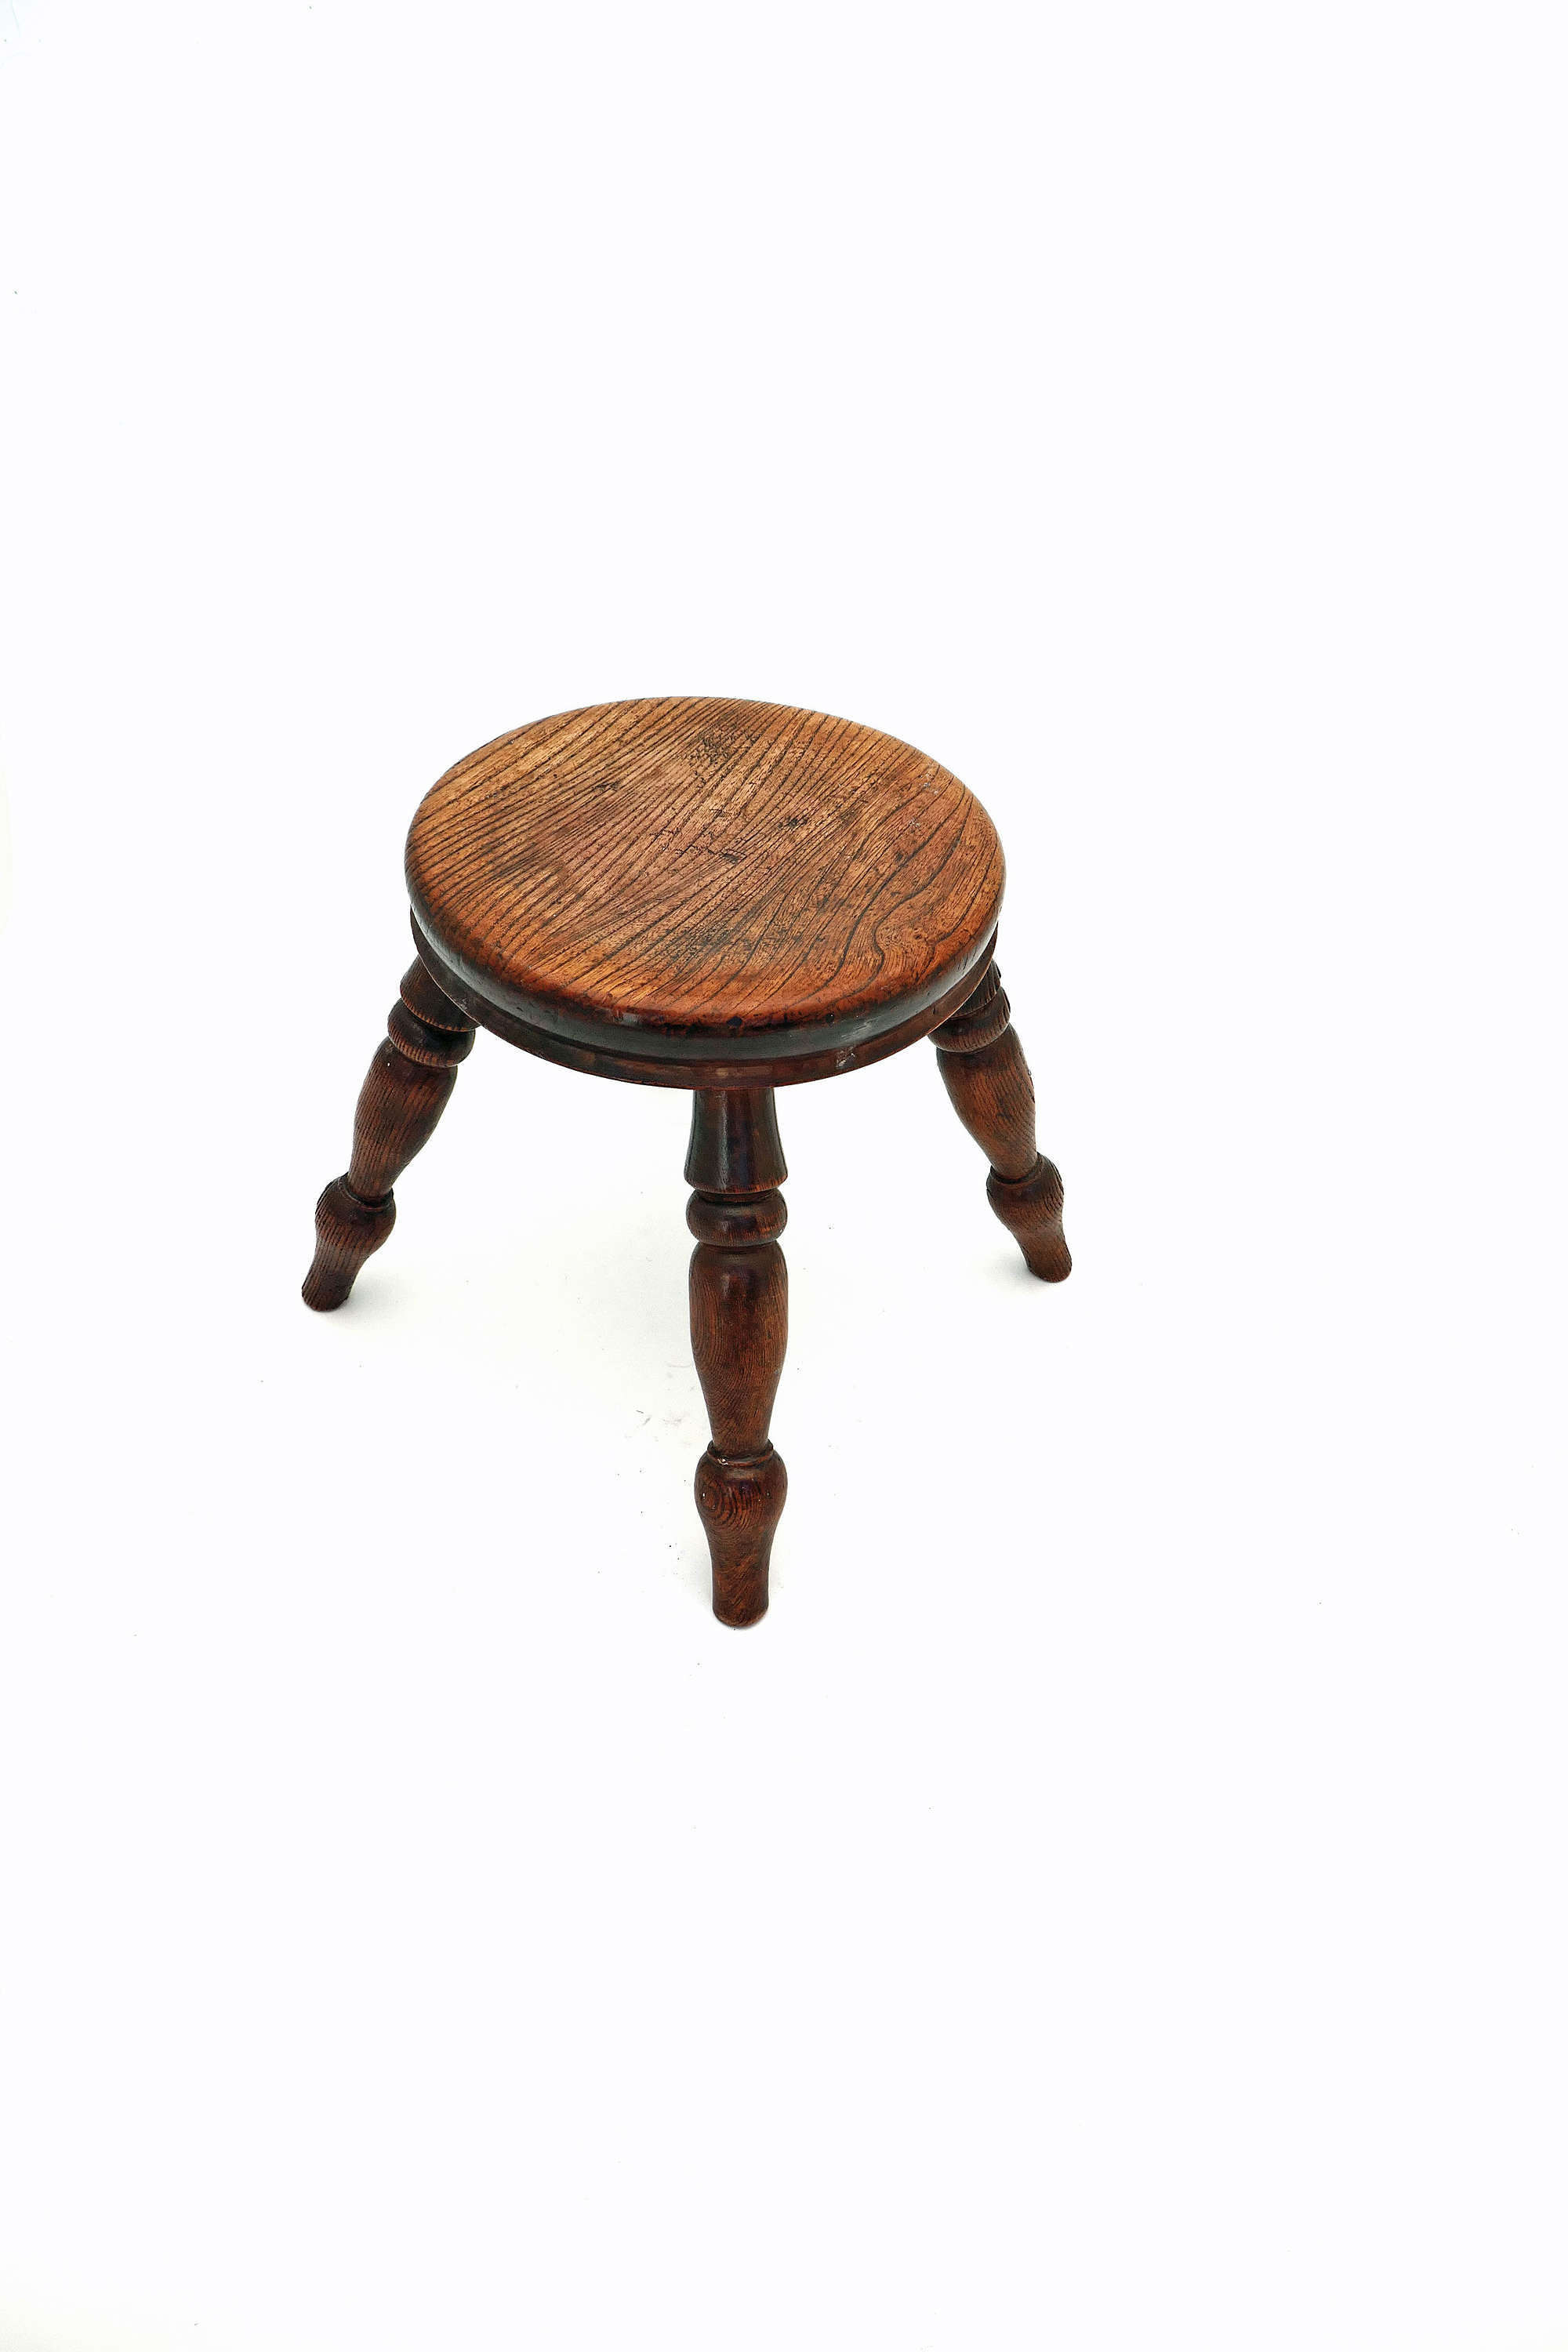 Antique Country Furniture Mid 19thc Elm & Ash Milking Stool. English.